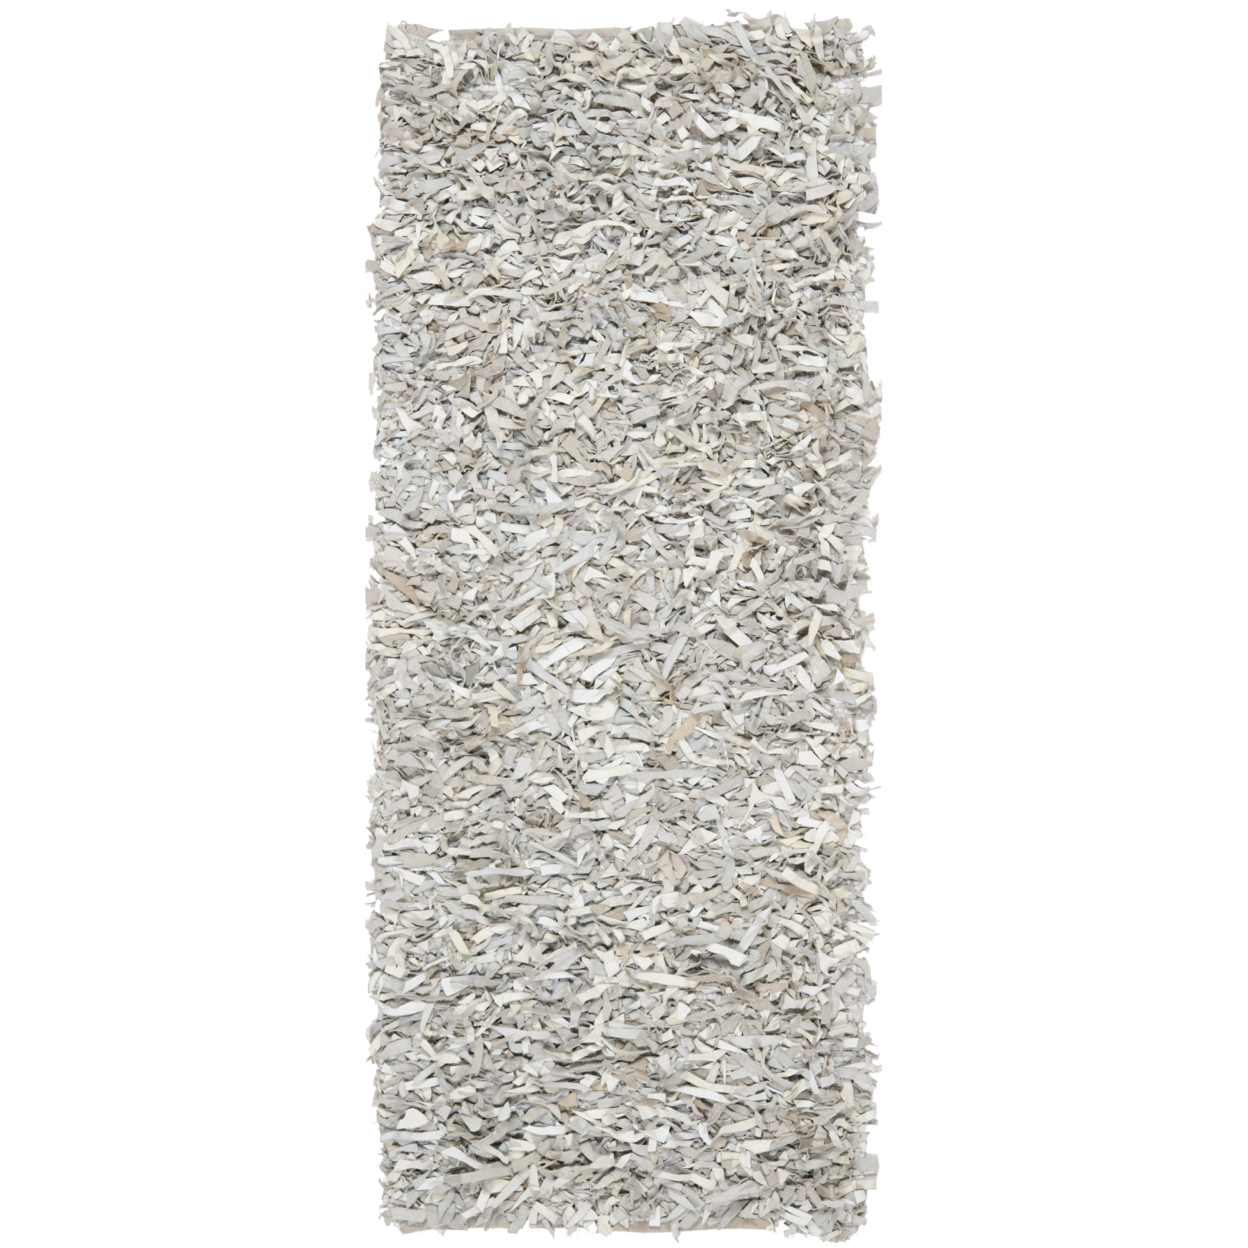 SAFAVIEH Leather Shag LSG511C Hand-knotted White Rug - 8' Square